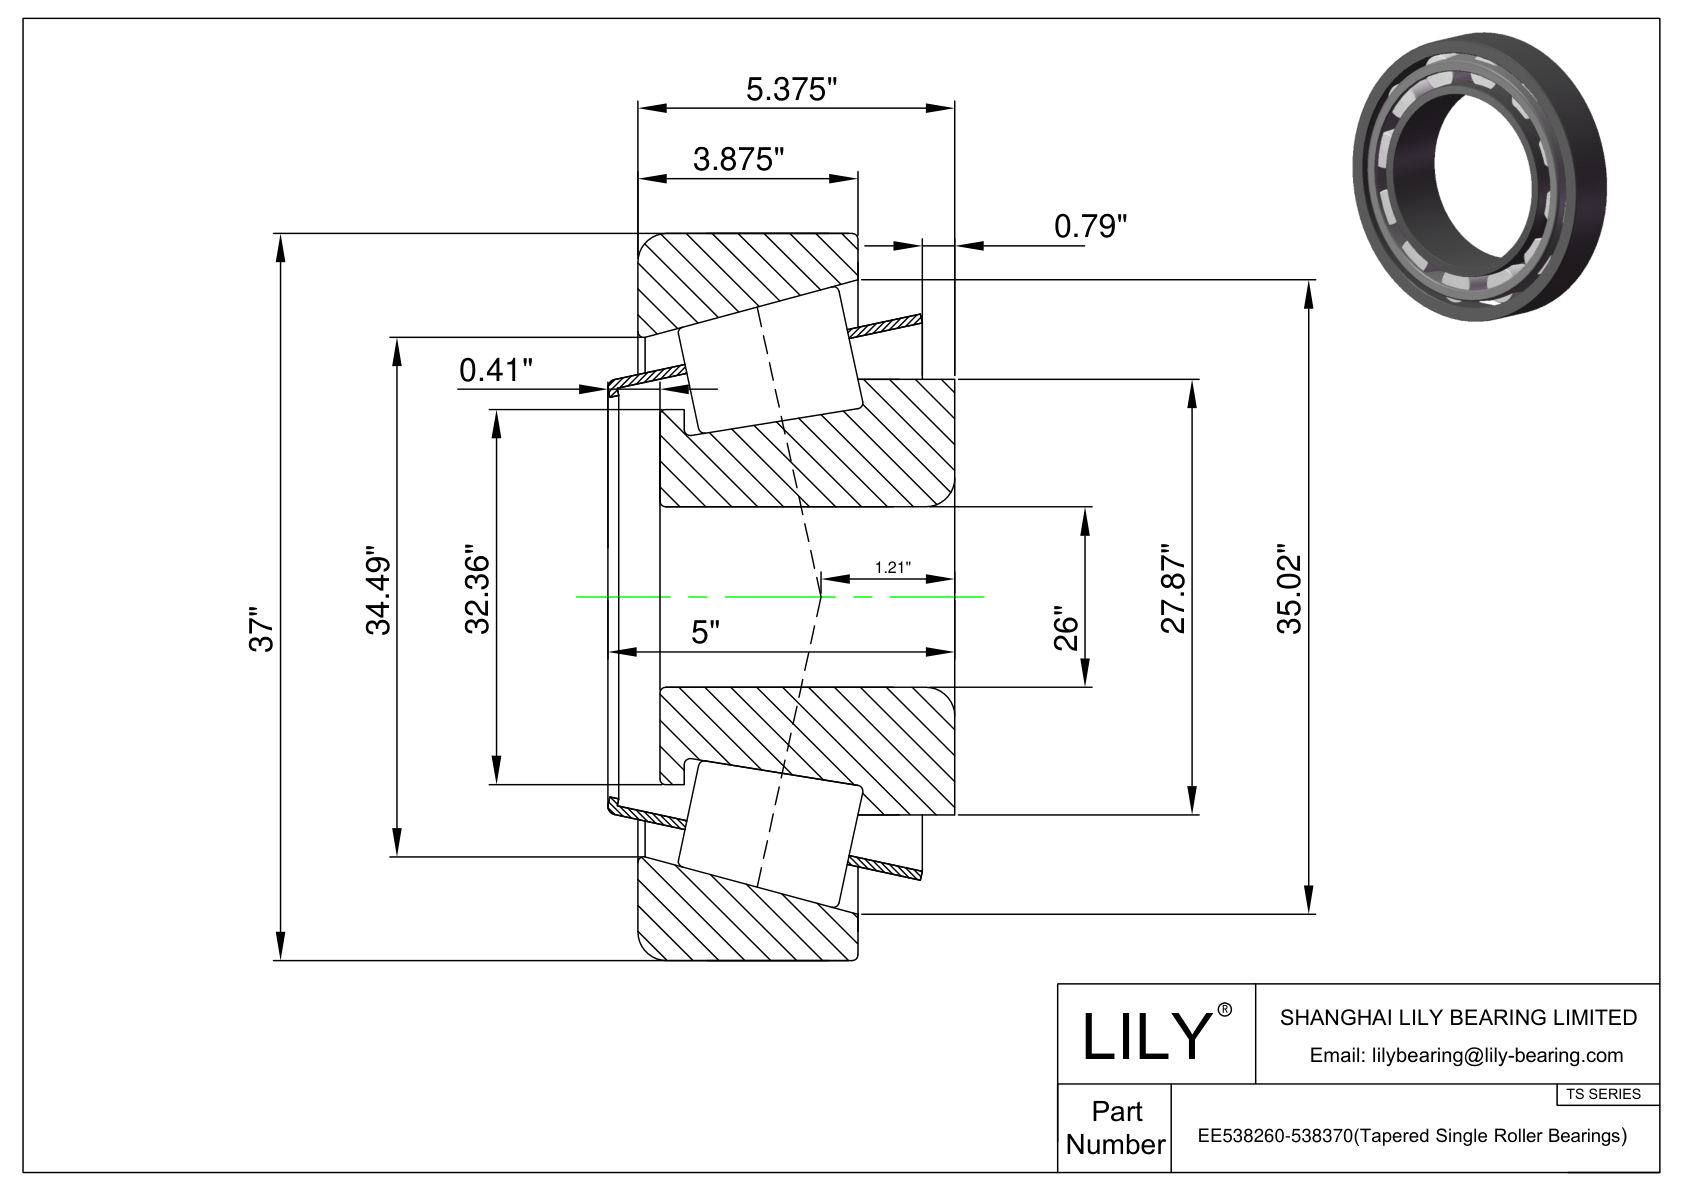 EE538260-538370 TS (Tapered Single Roller Bearings) (Imperial) cad drawing